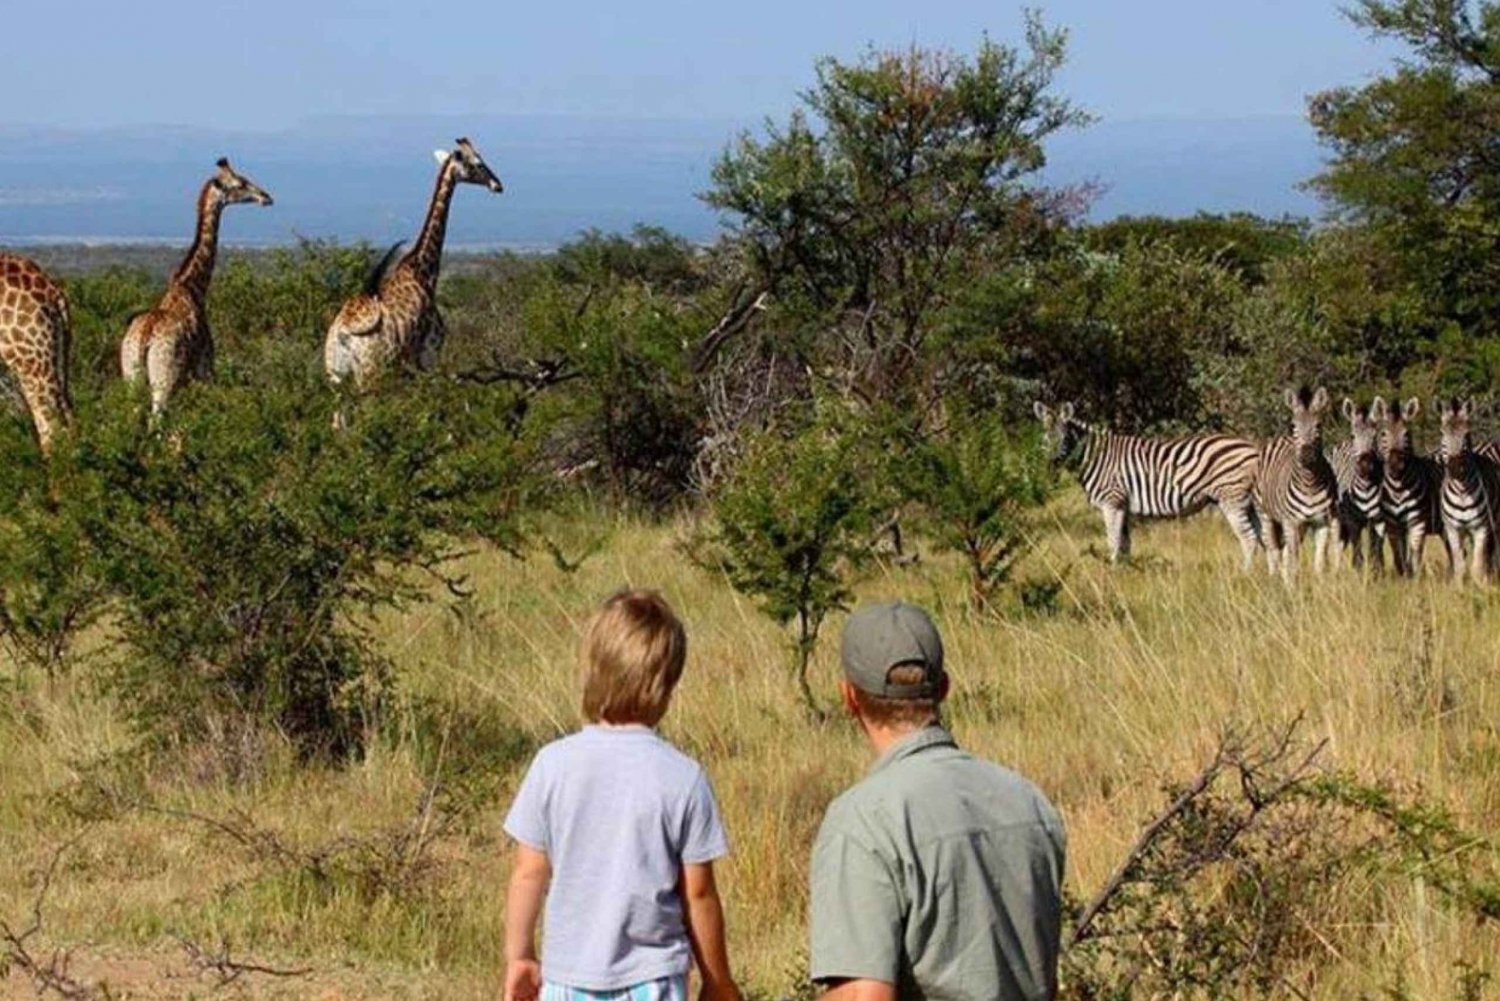 4 Day Kruger National Park Tour From Johannesburg & Panorama